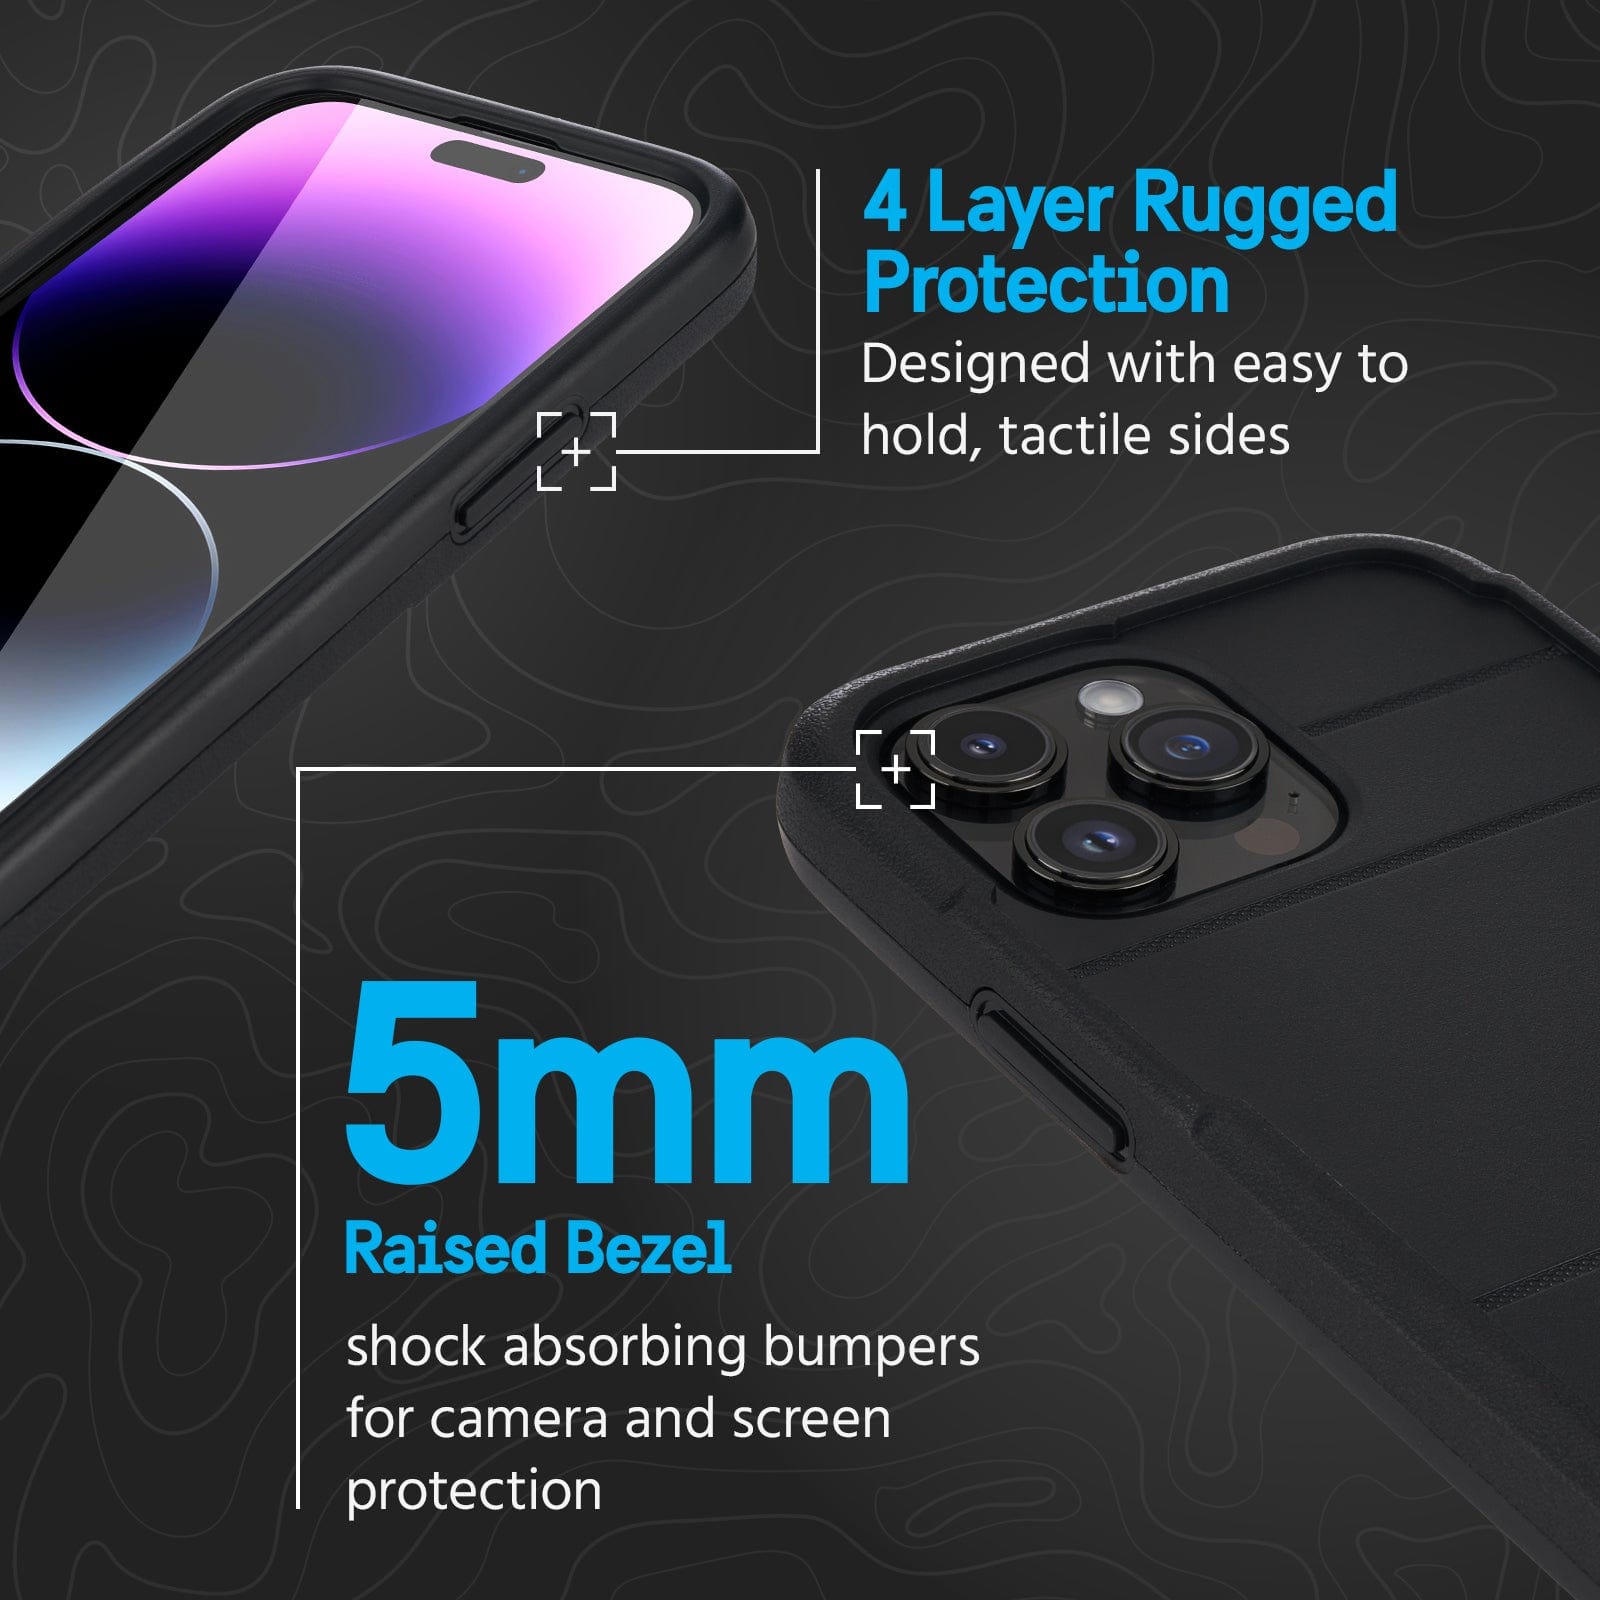 4 LAYER RUGGED PROTECTION. DESIGNED WITH EASY TO HOLD, TACTILE SIDES. 5MM RAISED BEZEL SHOCK ABSORBING BUMPERS FOR CAMERA AND SCREEN PROTECTION. 